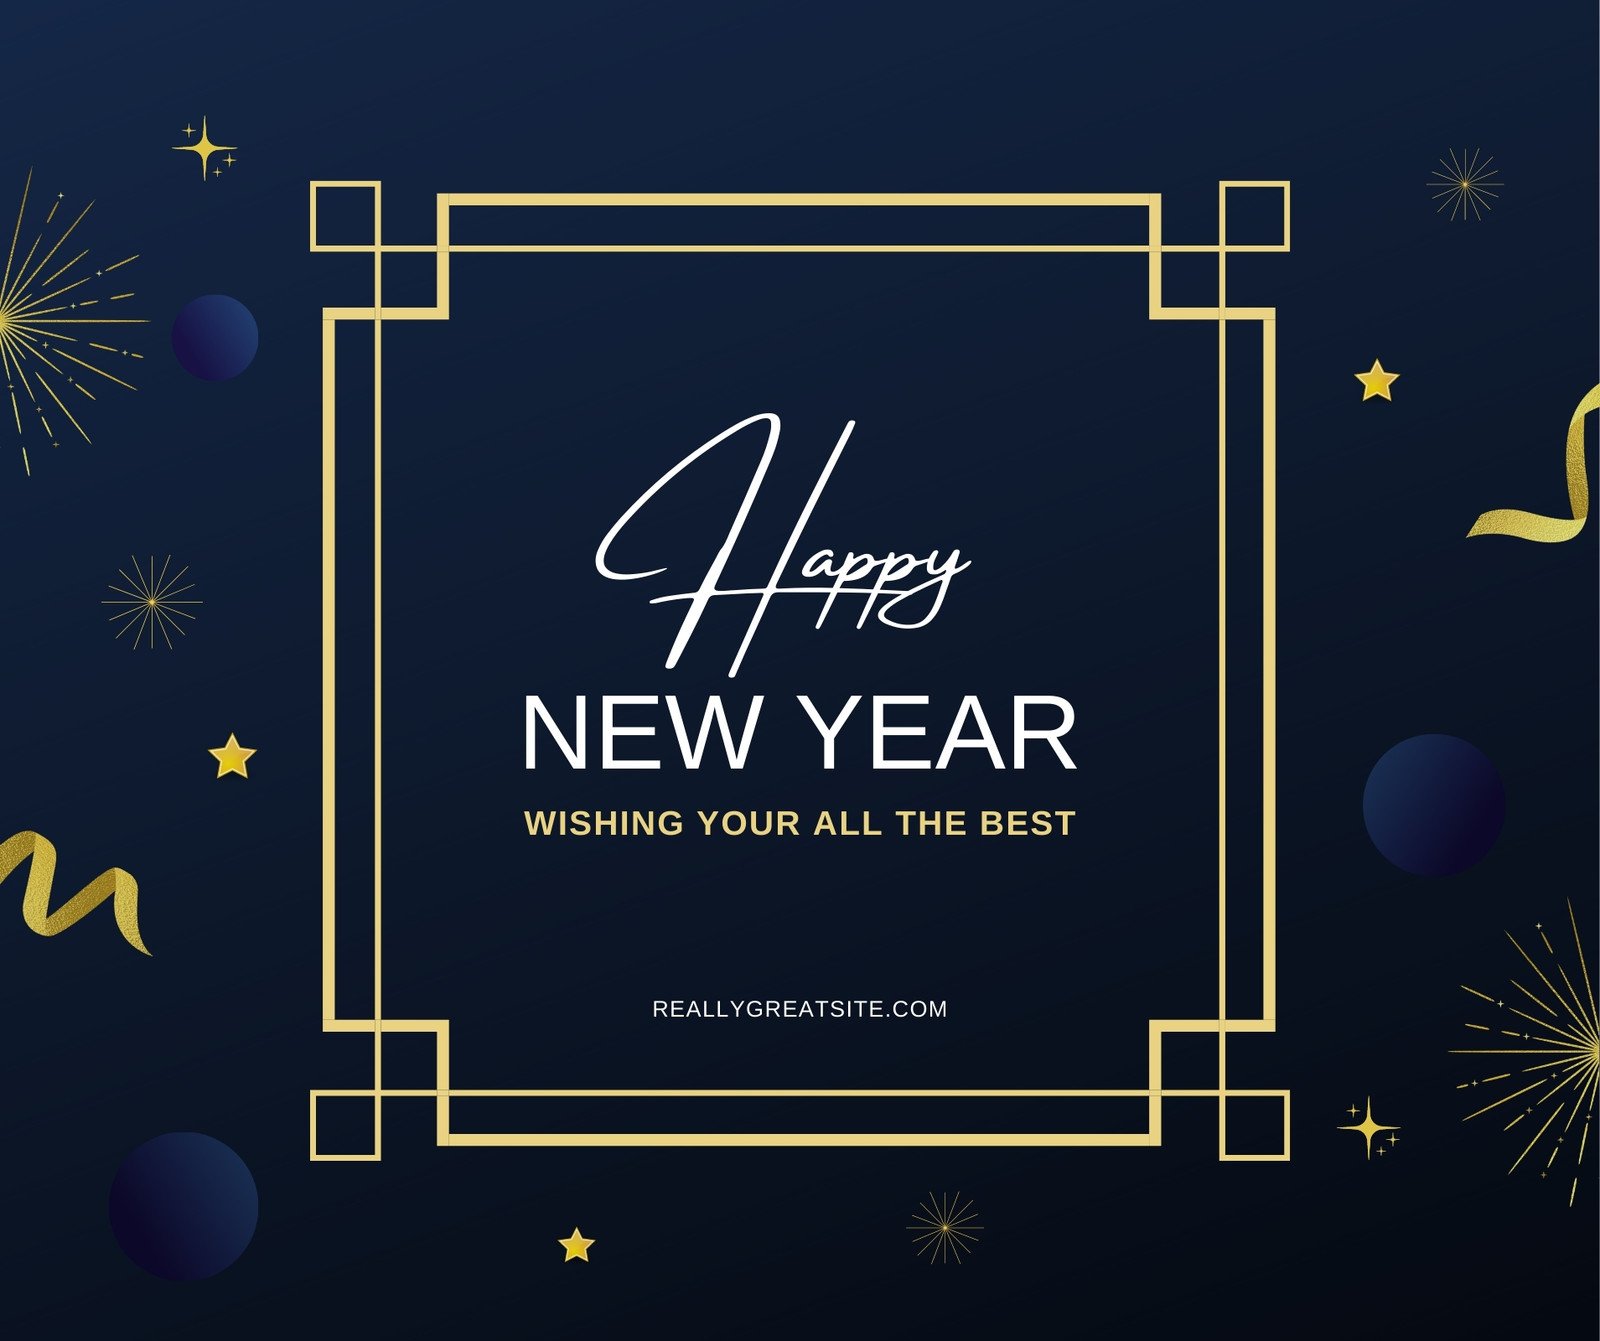 https://marketplace.canva.com/EAEzvilSmjY/2/0/1600w/canva-gold-elegant-happy-new-year-and-wishes-facebook-post-xt1r_w3rD6c.jpg